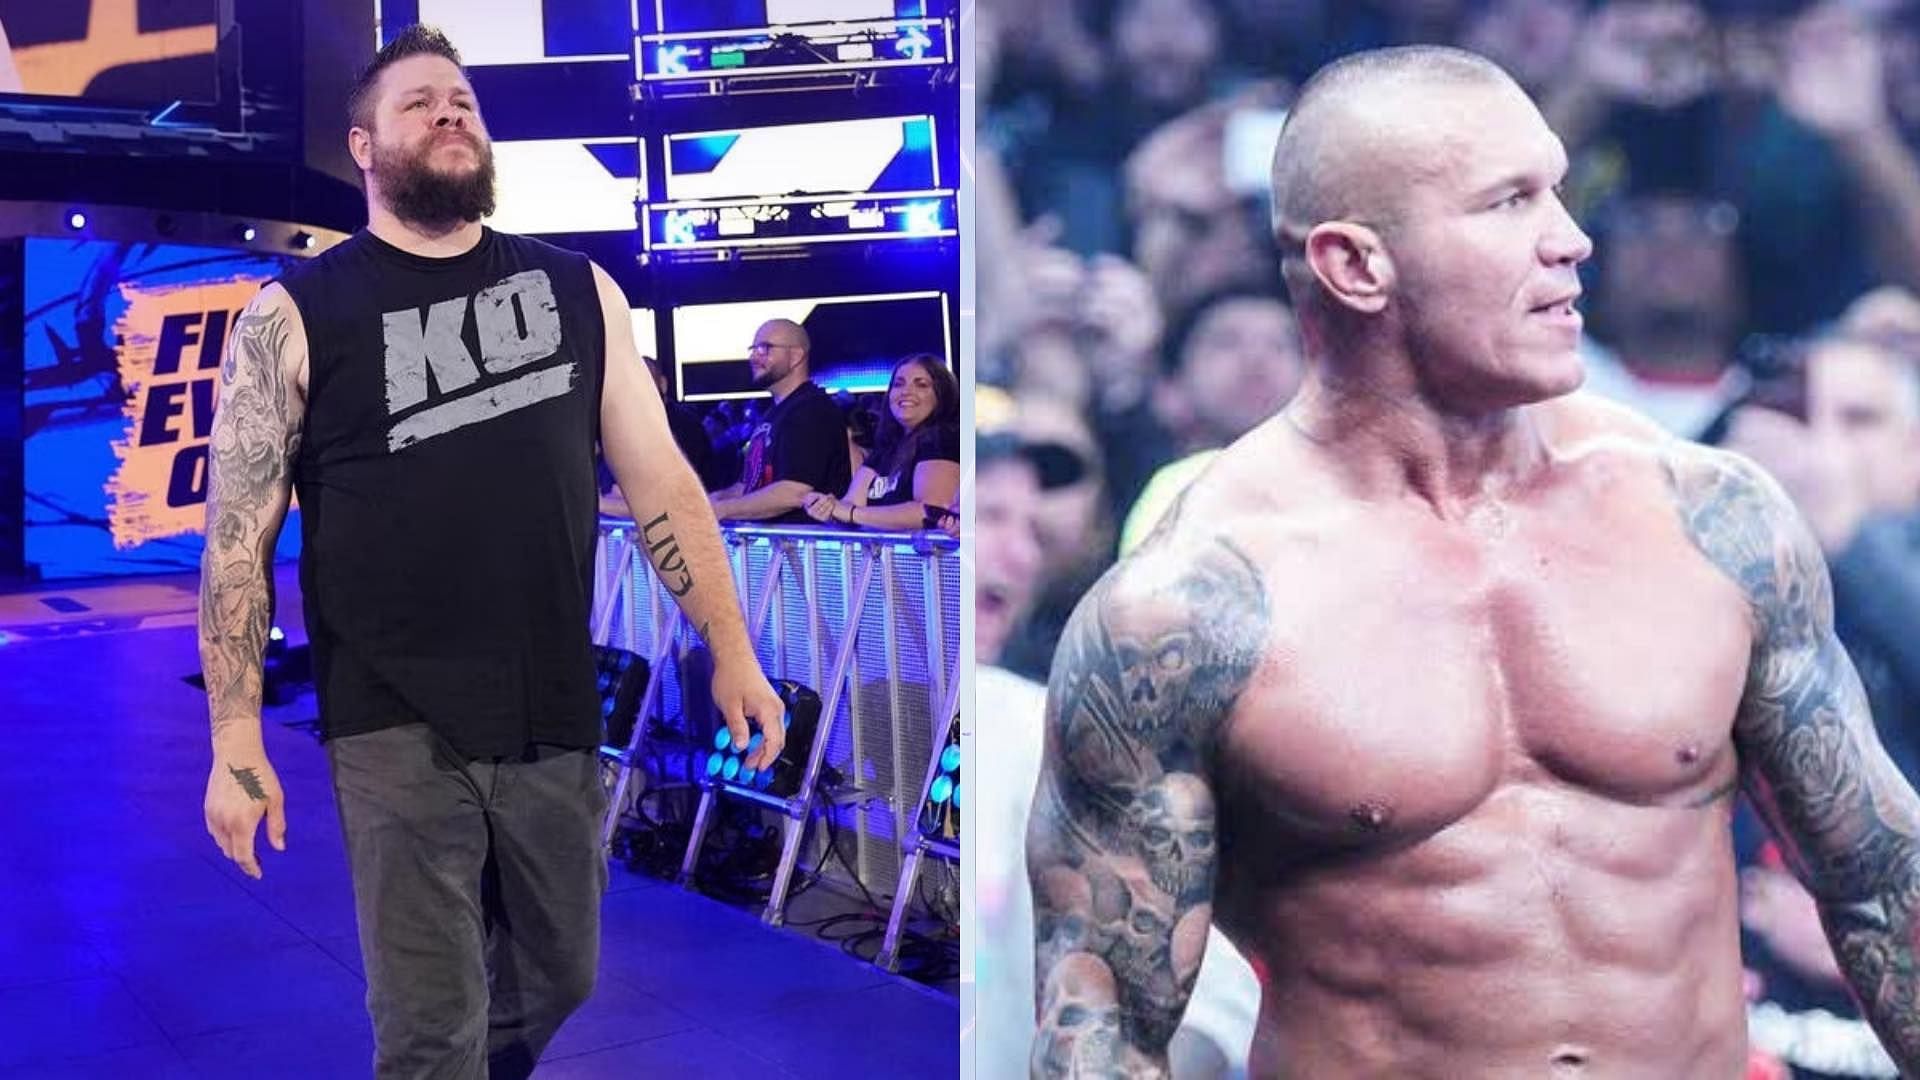 Randy Orton will be on The Kevin Owens Show on WWE SmackDown